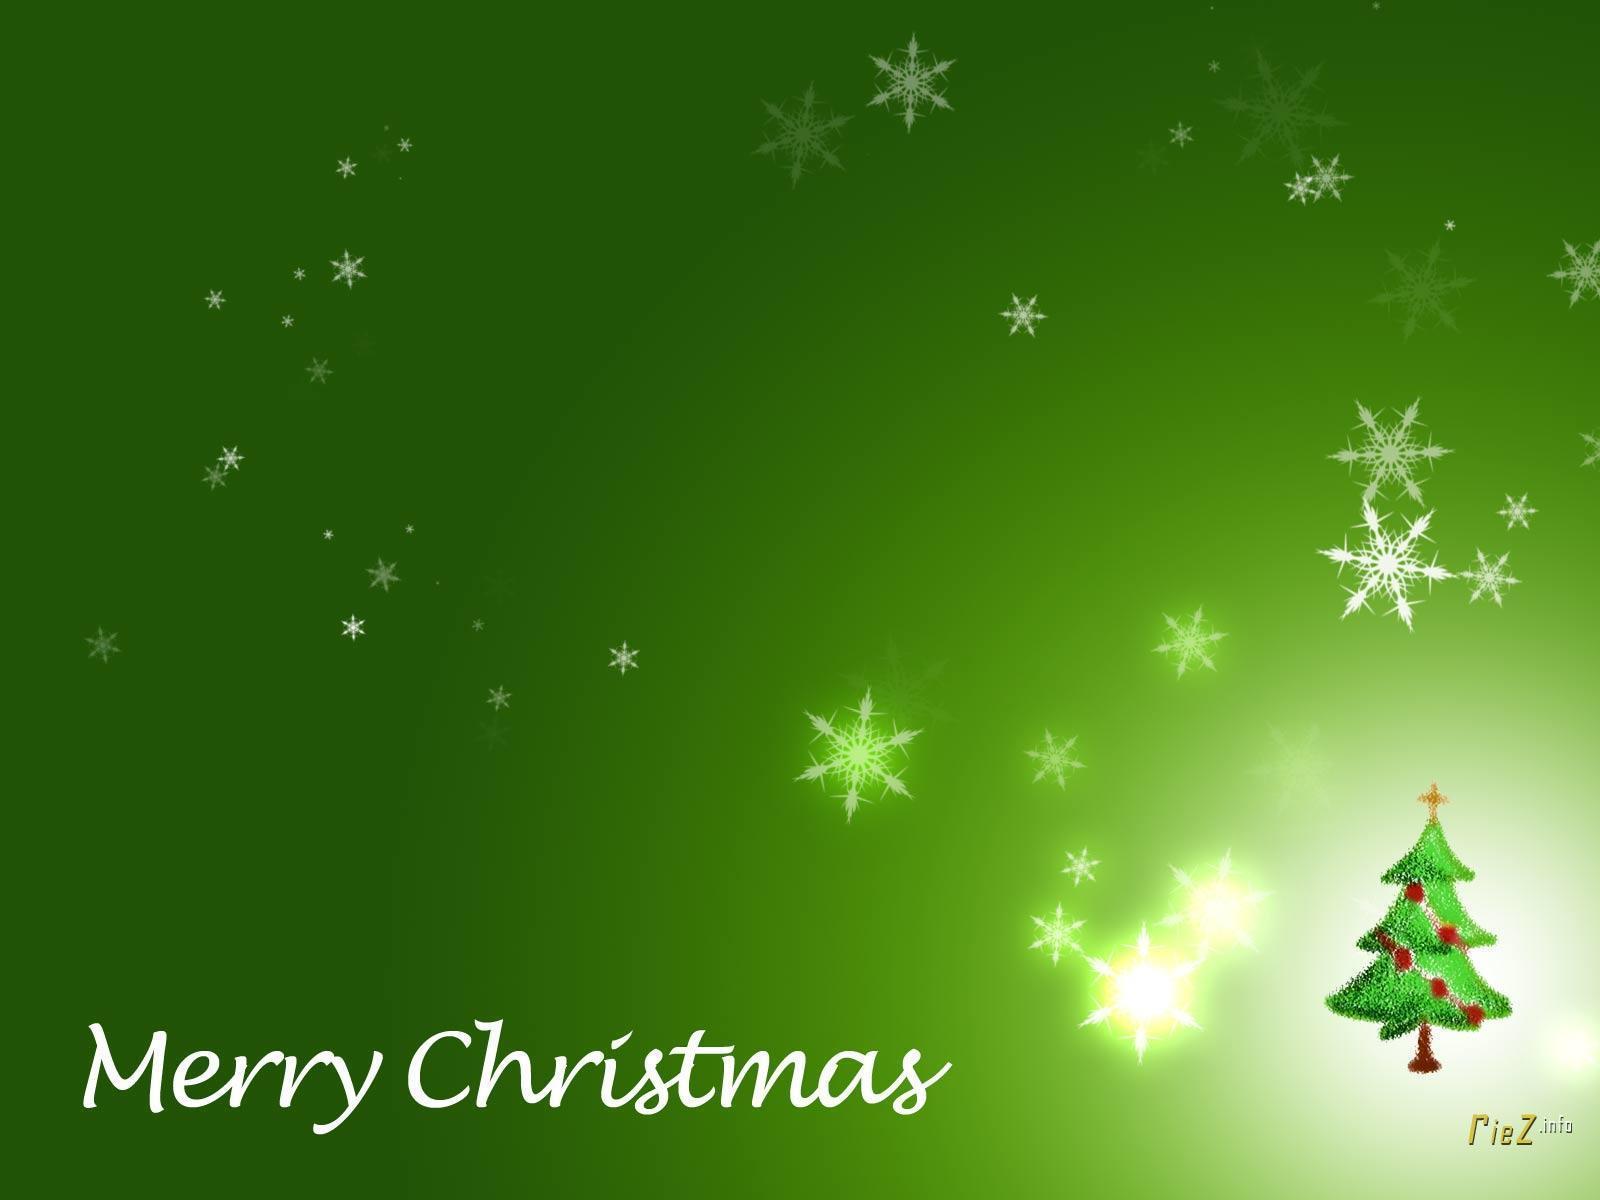 Powerpoint Christmas Background 27185 Wallpaper: 1600x1200